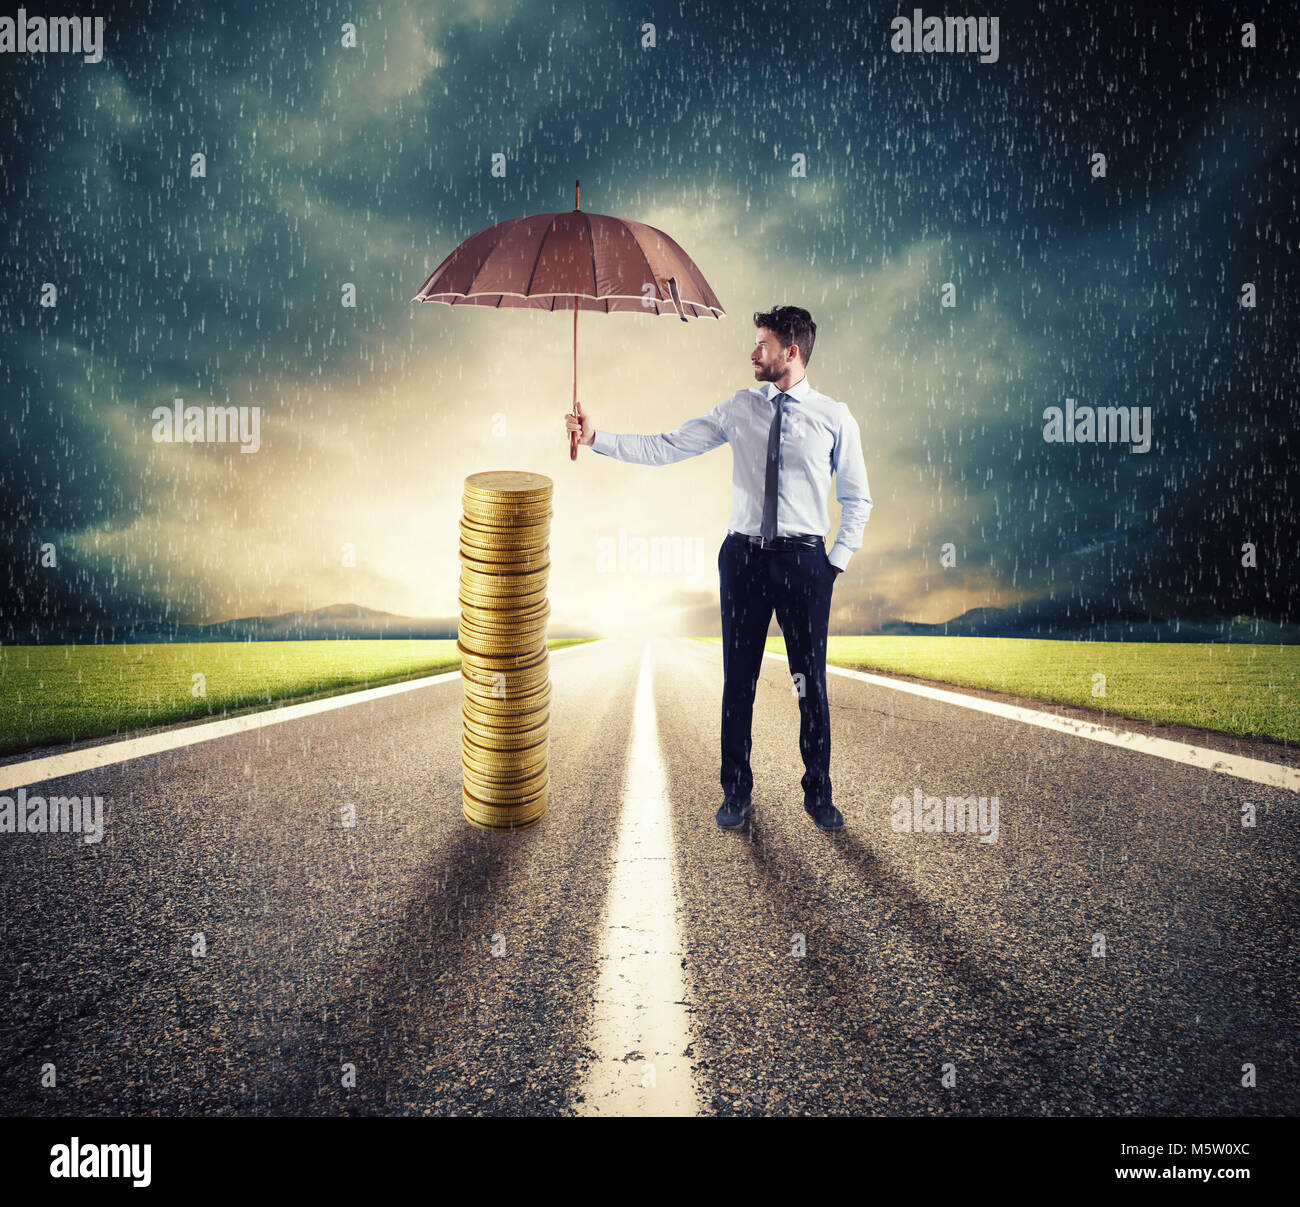 Businessman protects his money savings with umbrella. concept of insurance and money protection Stock Photo